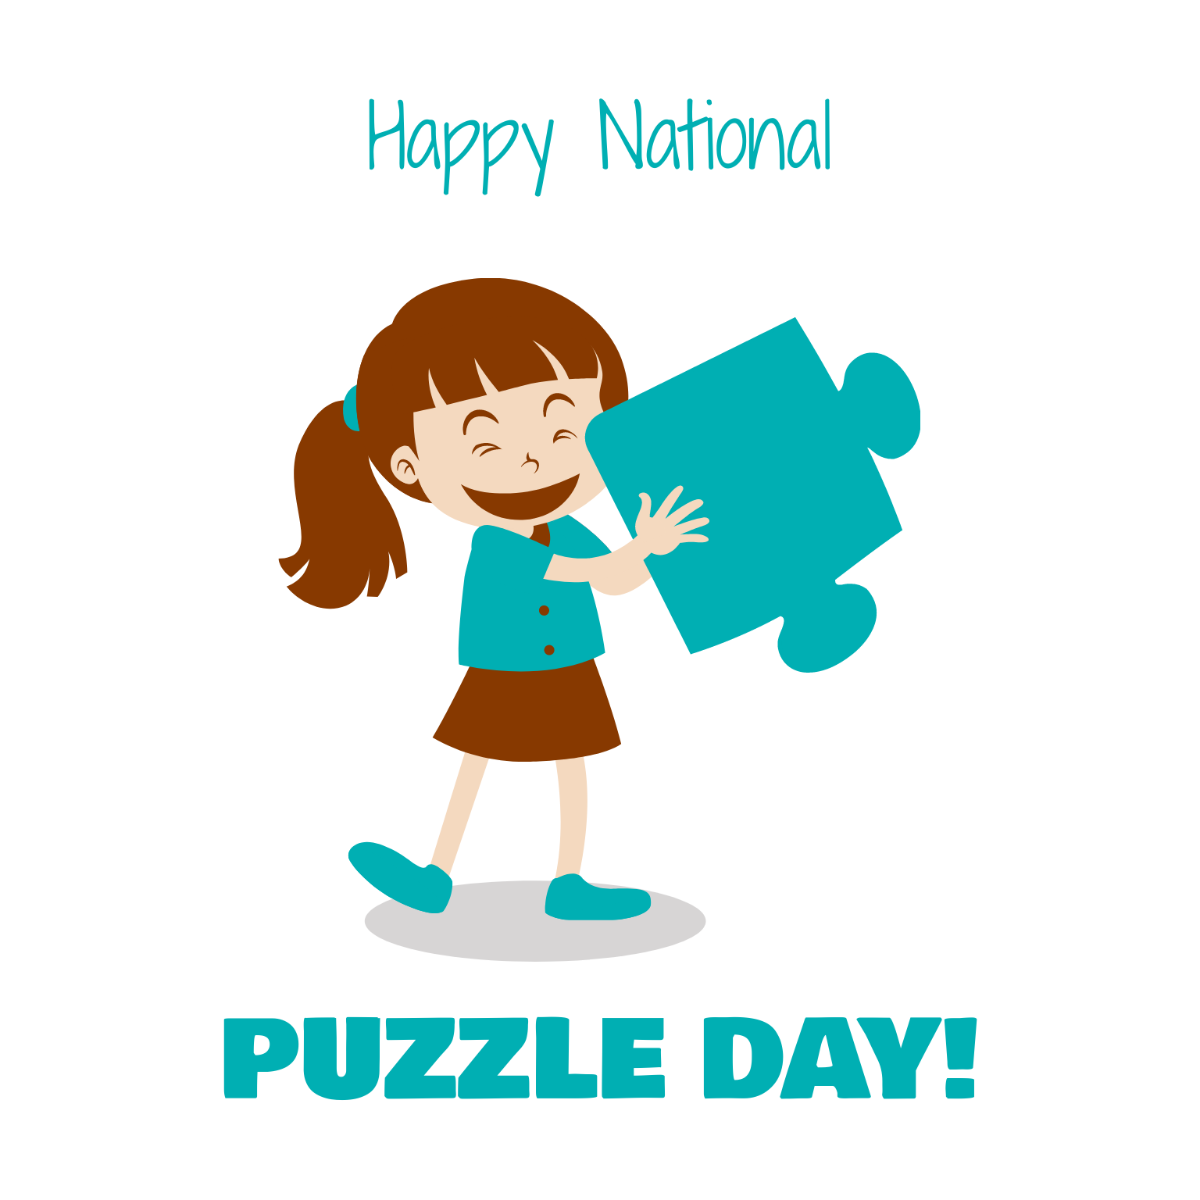 National Puzzle Day Cartoon Vector Template